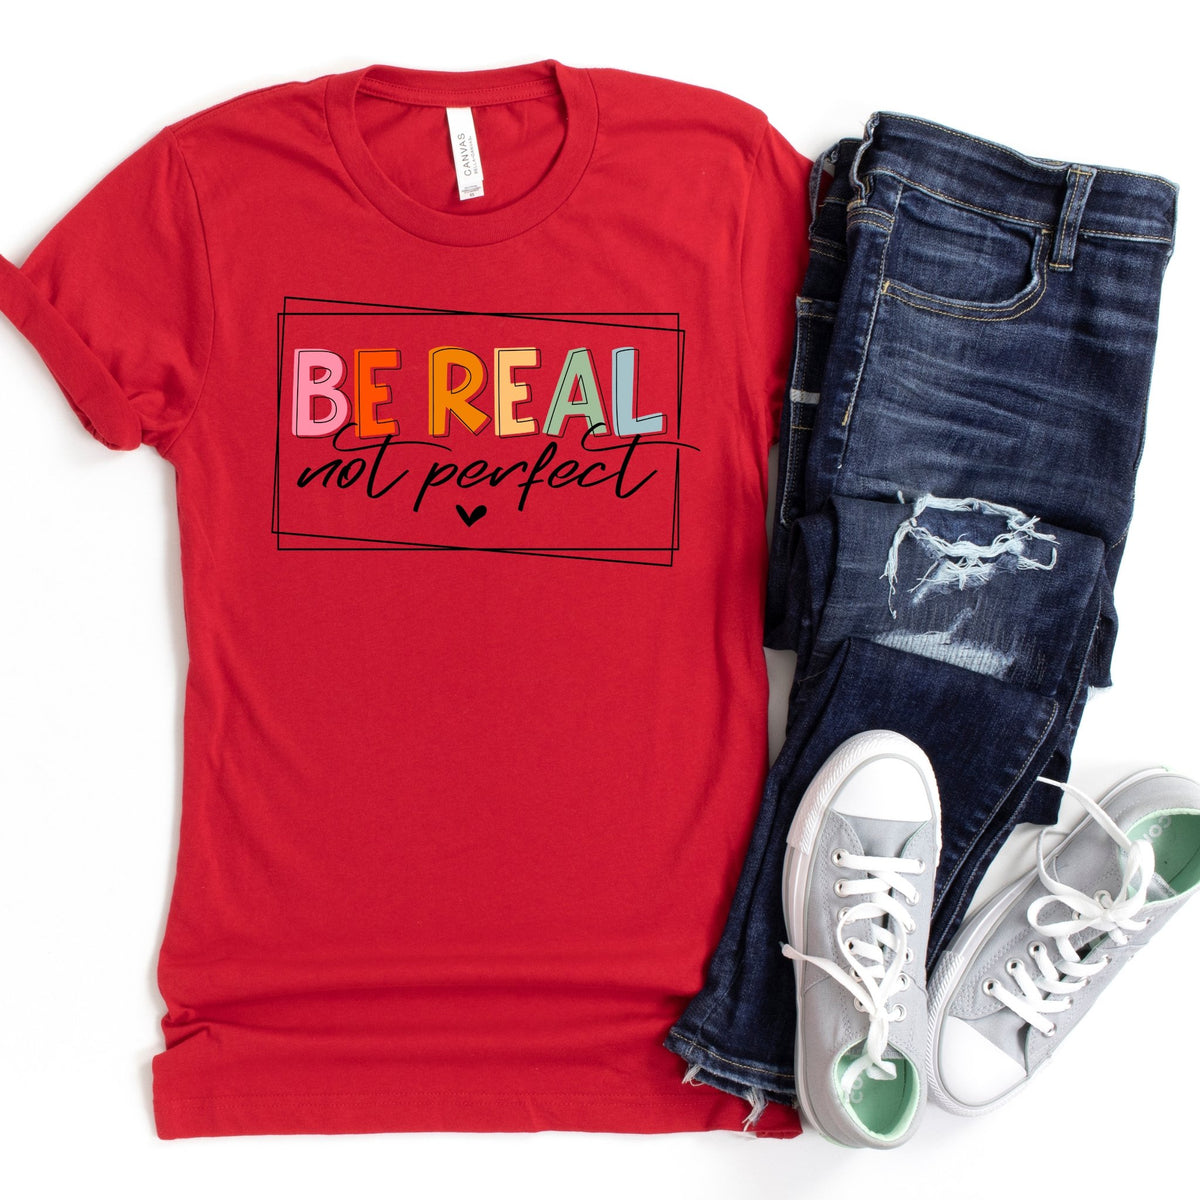 Be Real Not Perfect - Nola Charm